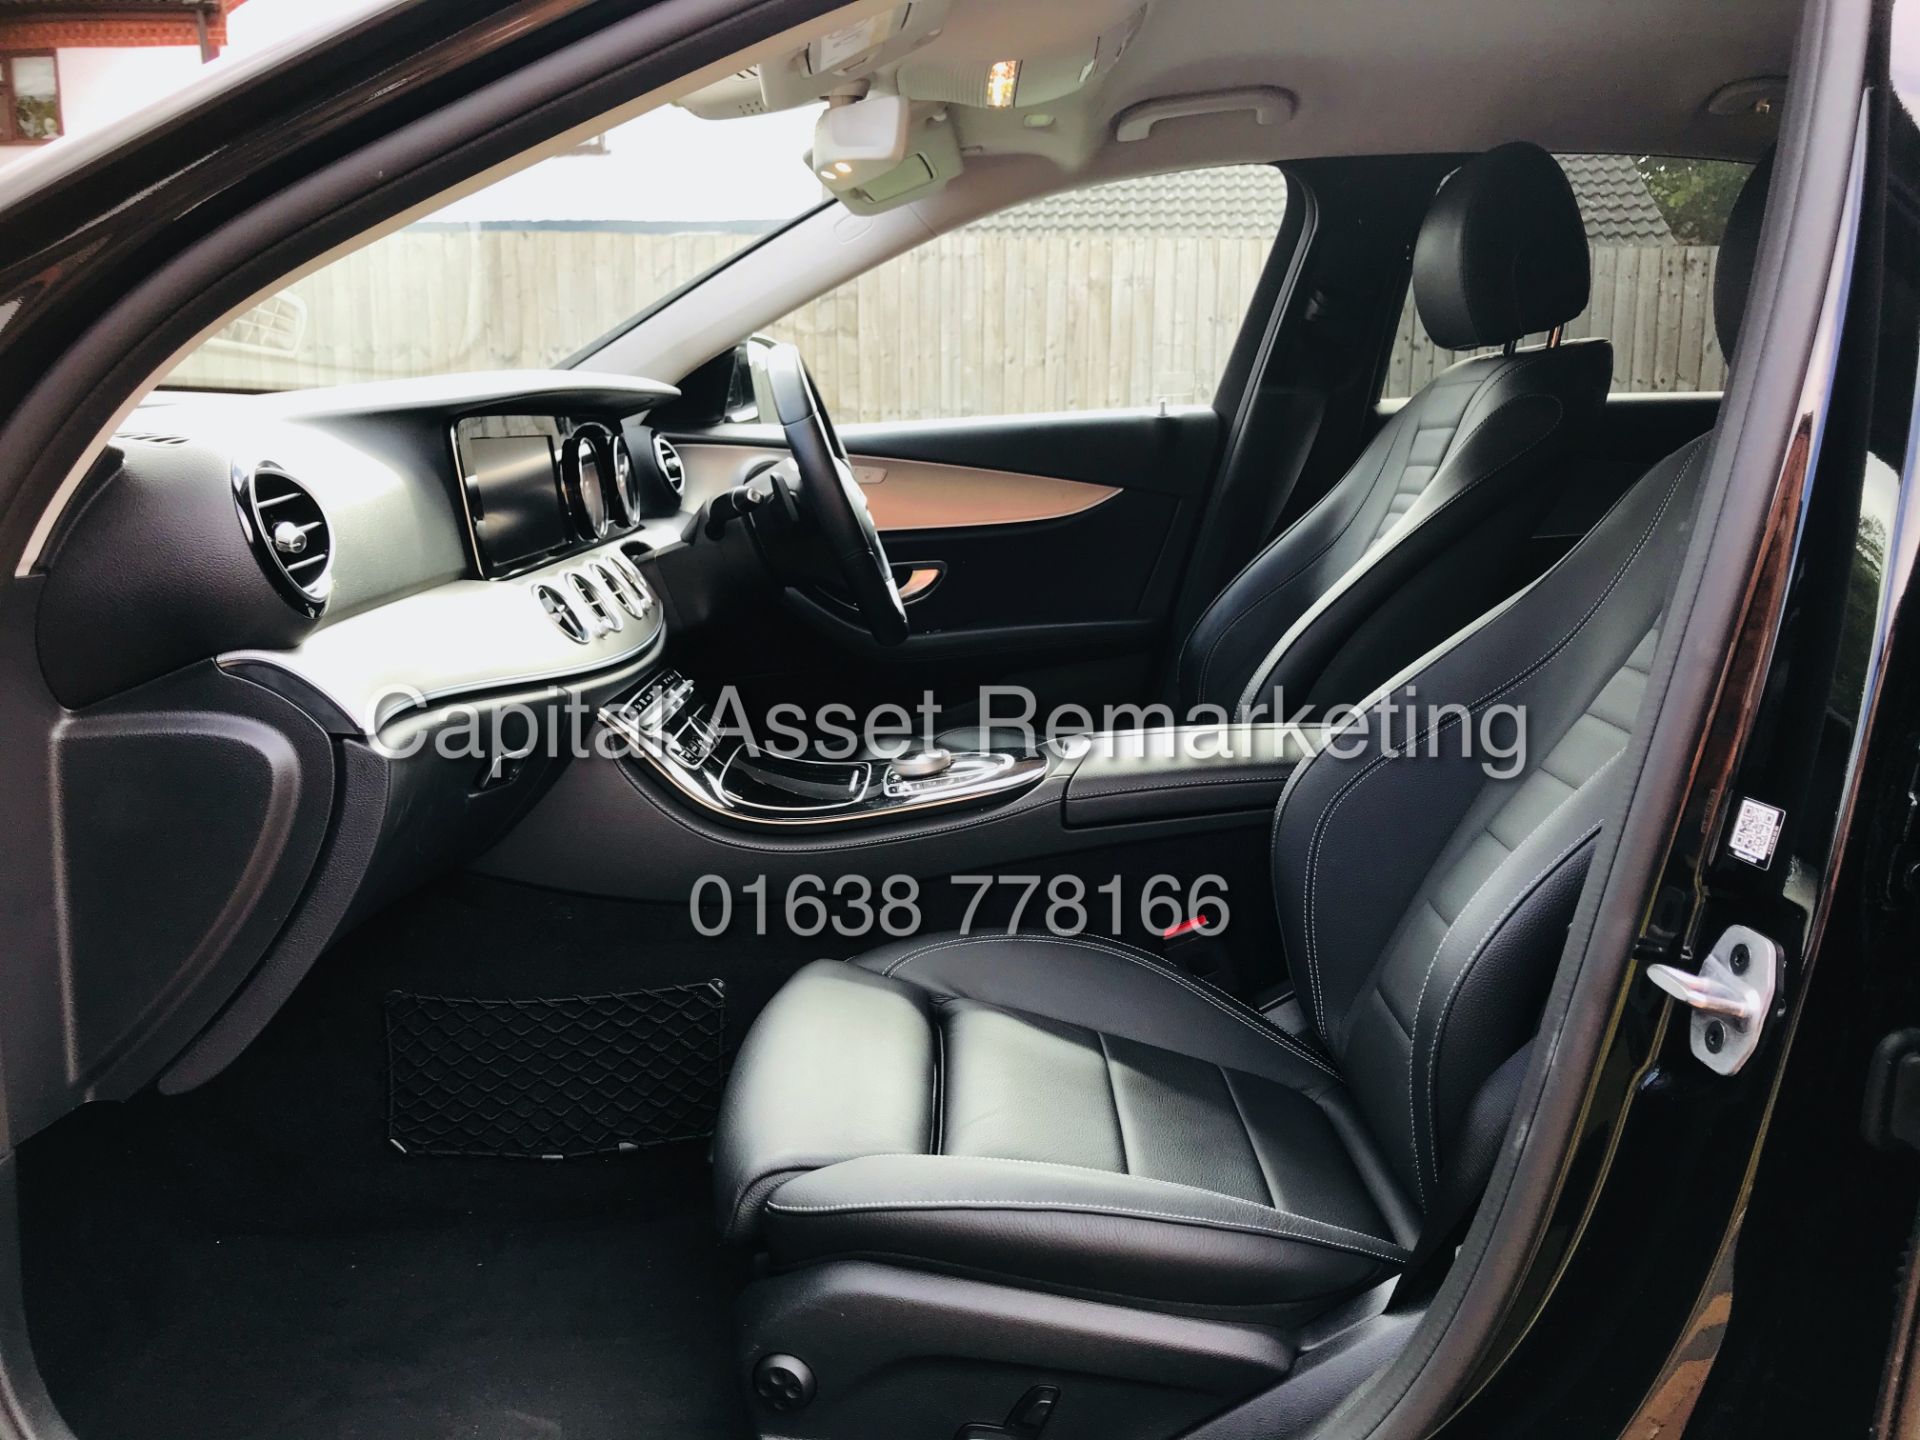 (On Sale) MERCEDES E220d "SPECIAL EQUIPMENT" AUTO (2019) 1 OWNER *GREAT SPEC* TAKE A PEEK - Image 15 of 35